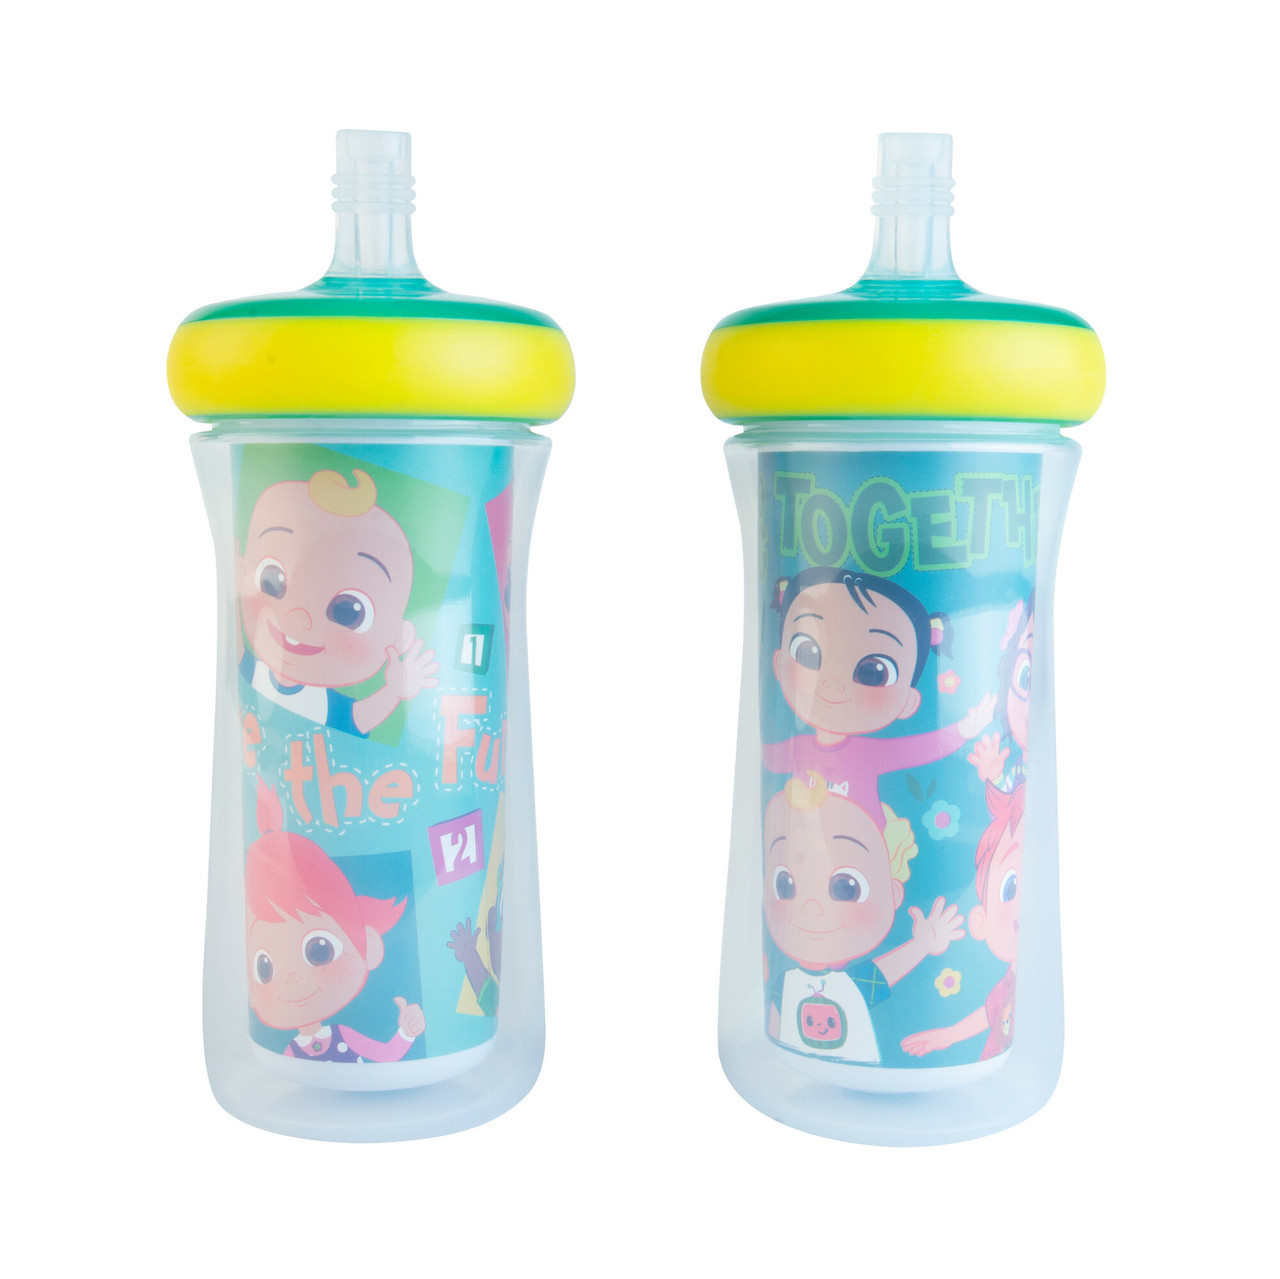 The First Years Greengrown Reusable Spill-proof Straw Toddler Cups